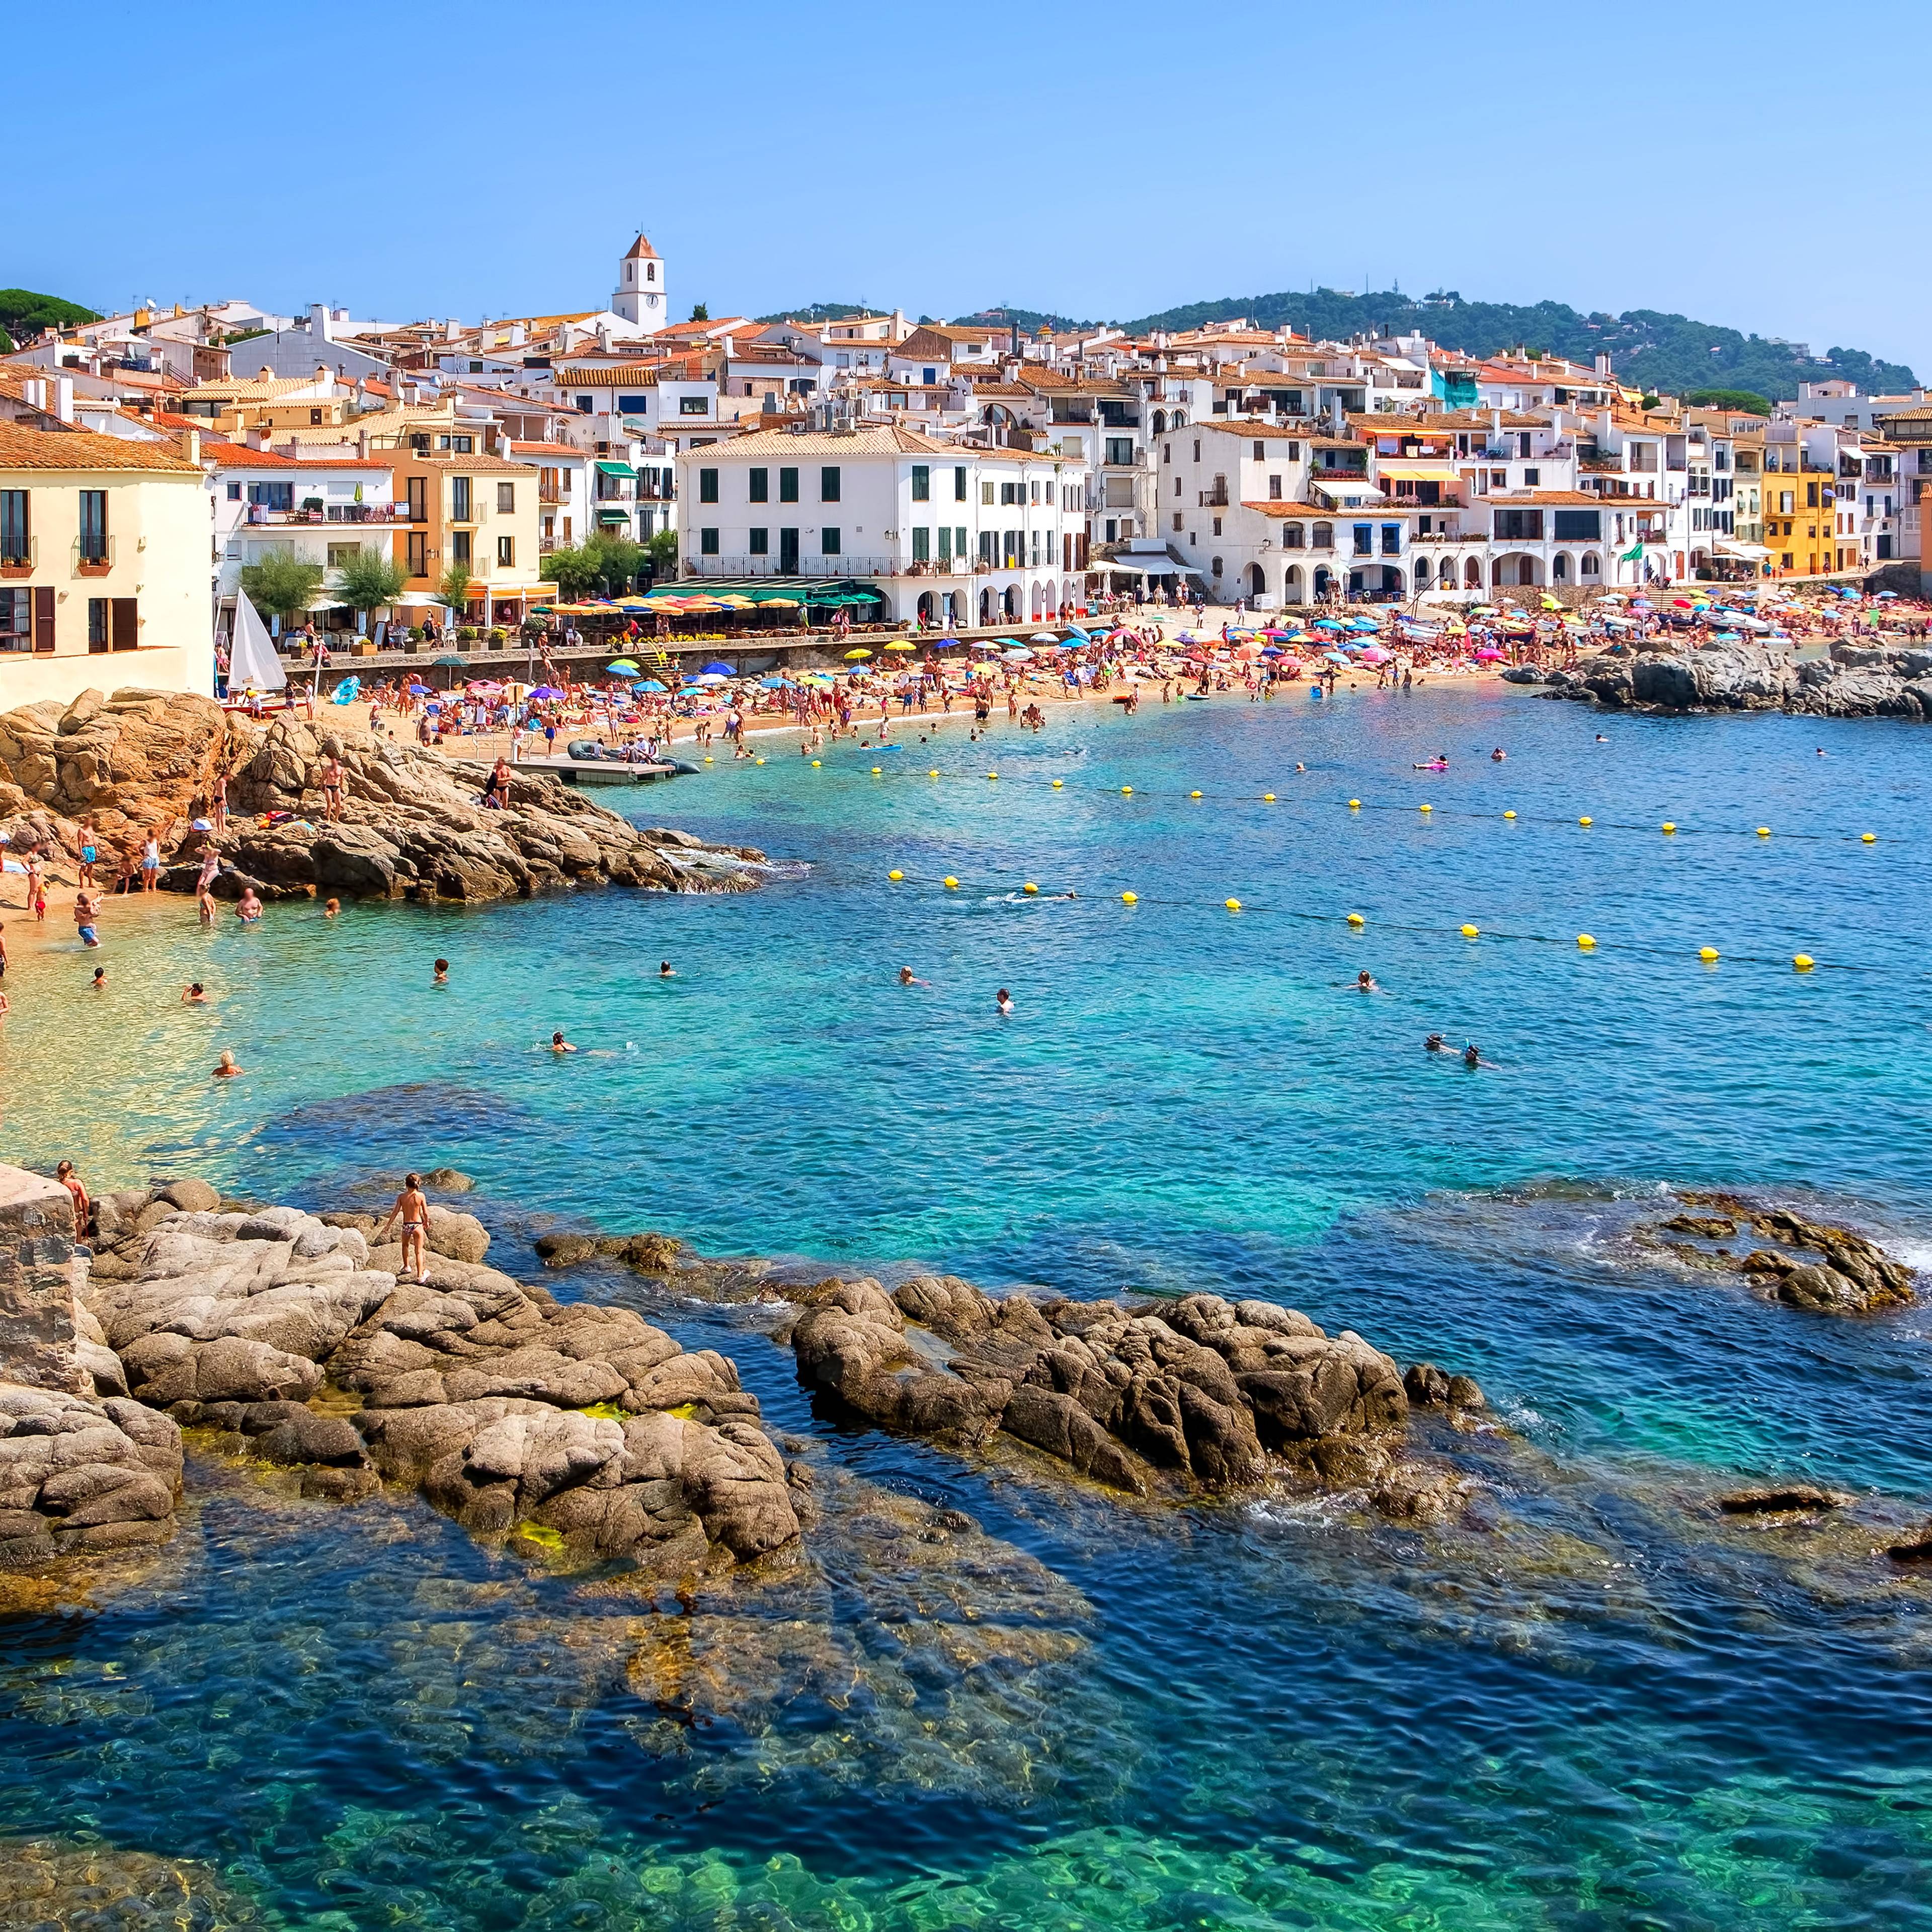 Barcelona to Girona via Golden Beaches, Ancient Towns and Authentic Restaurants